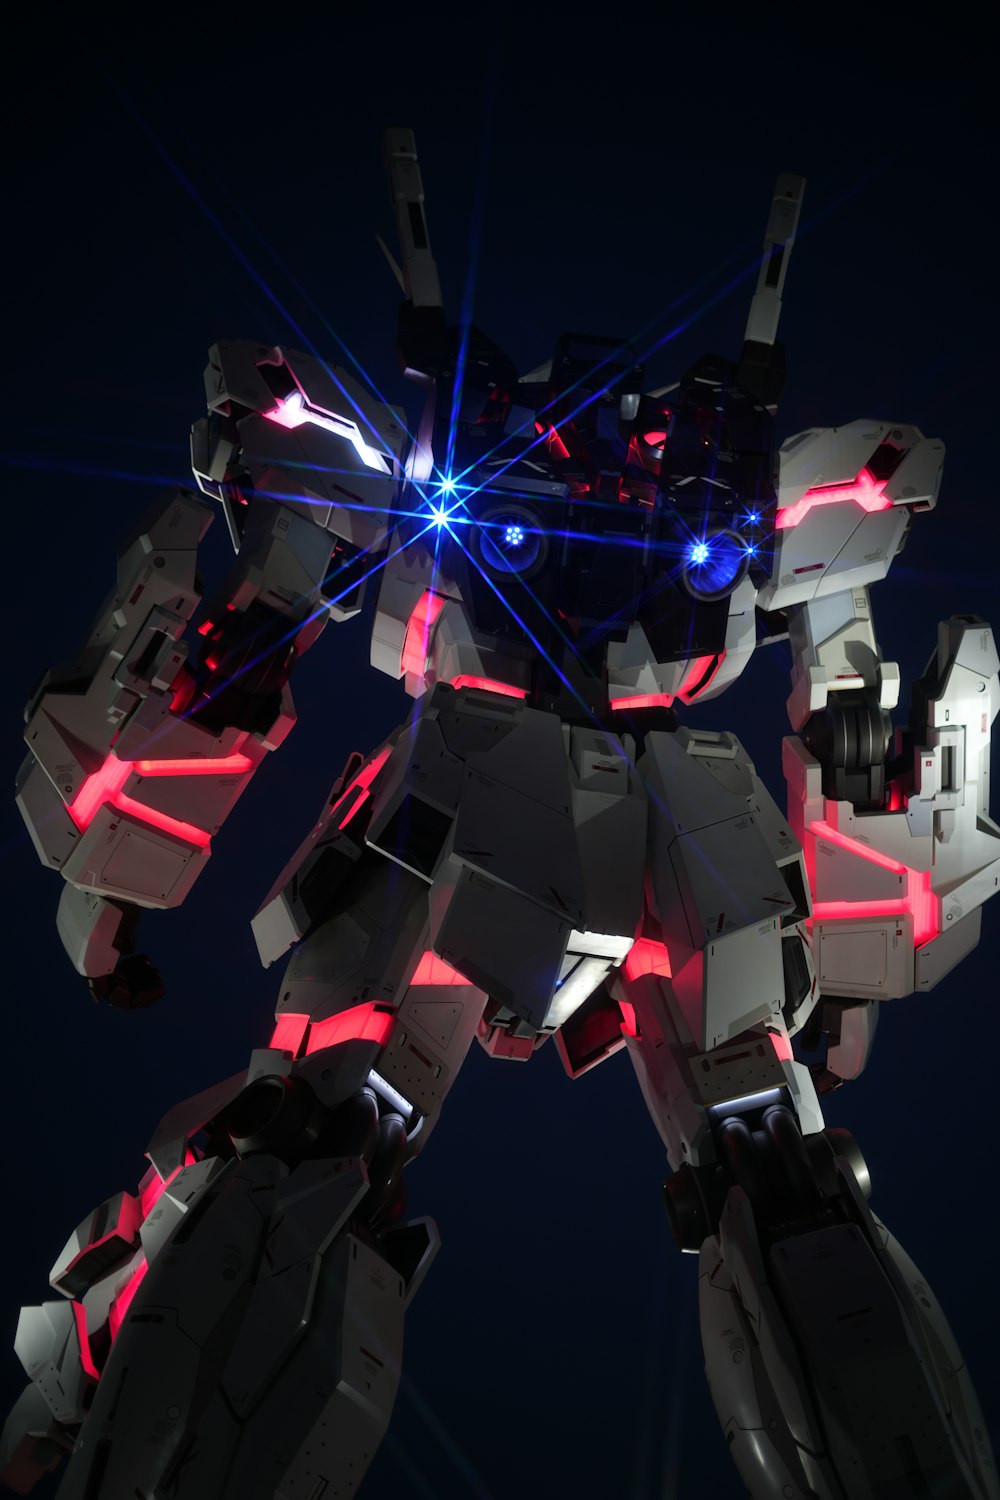 a futuristic robot with red and blue lights